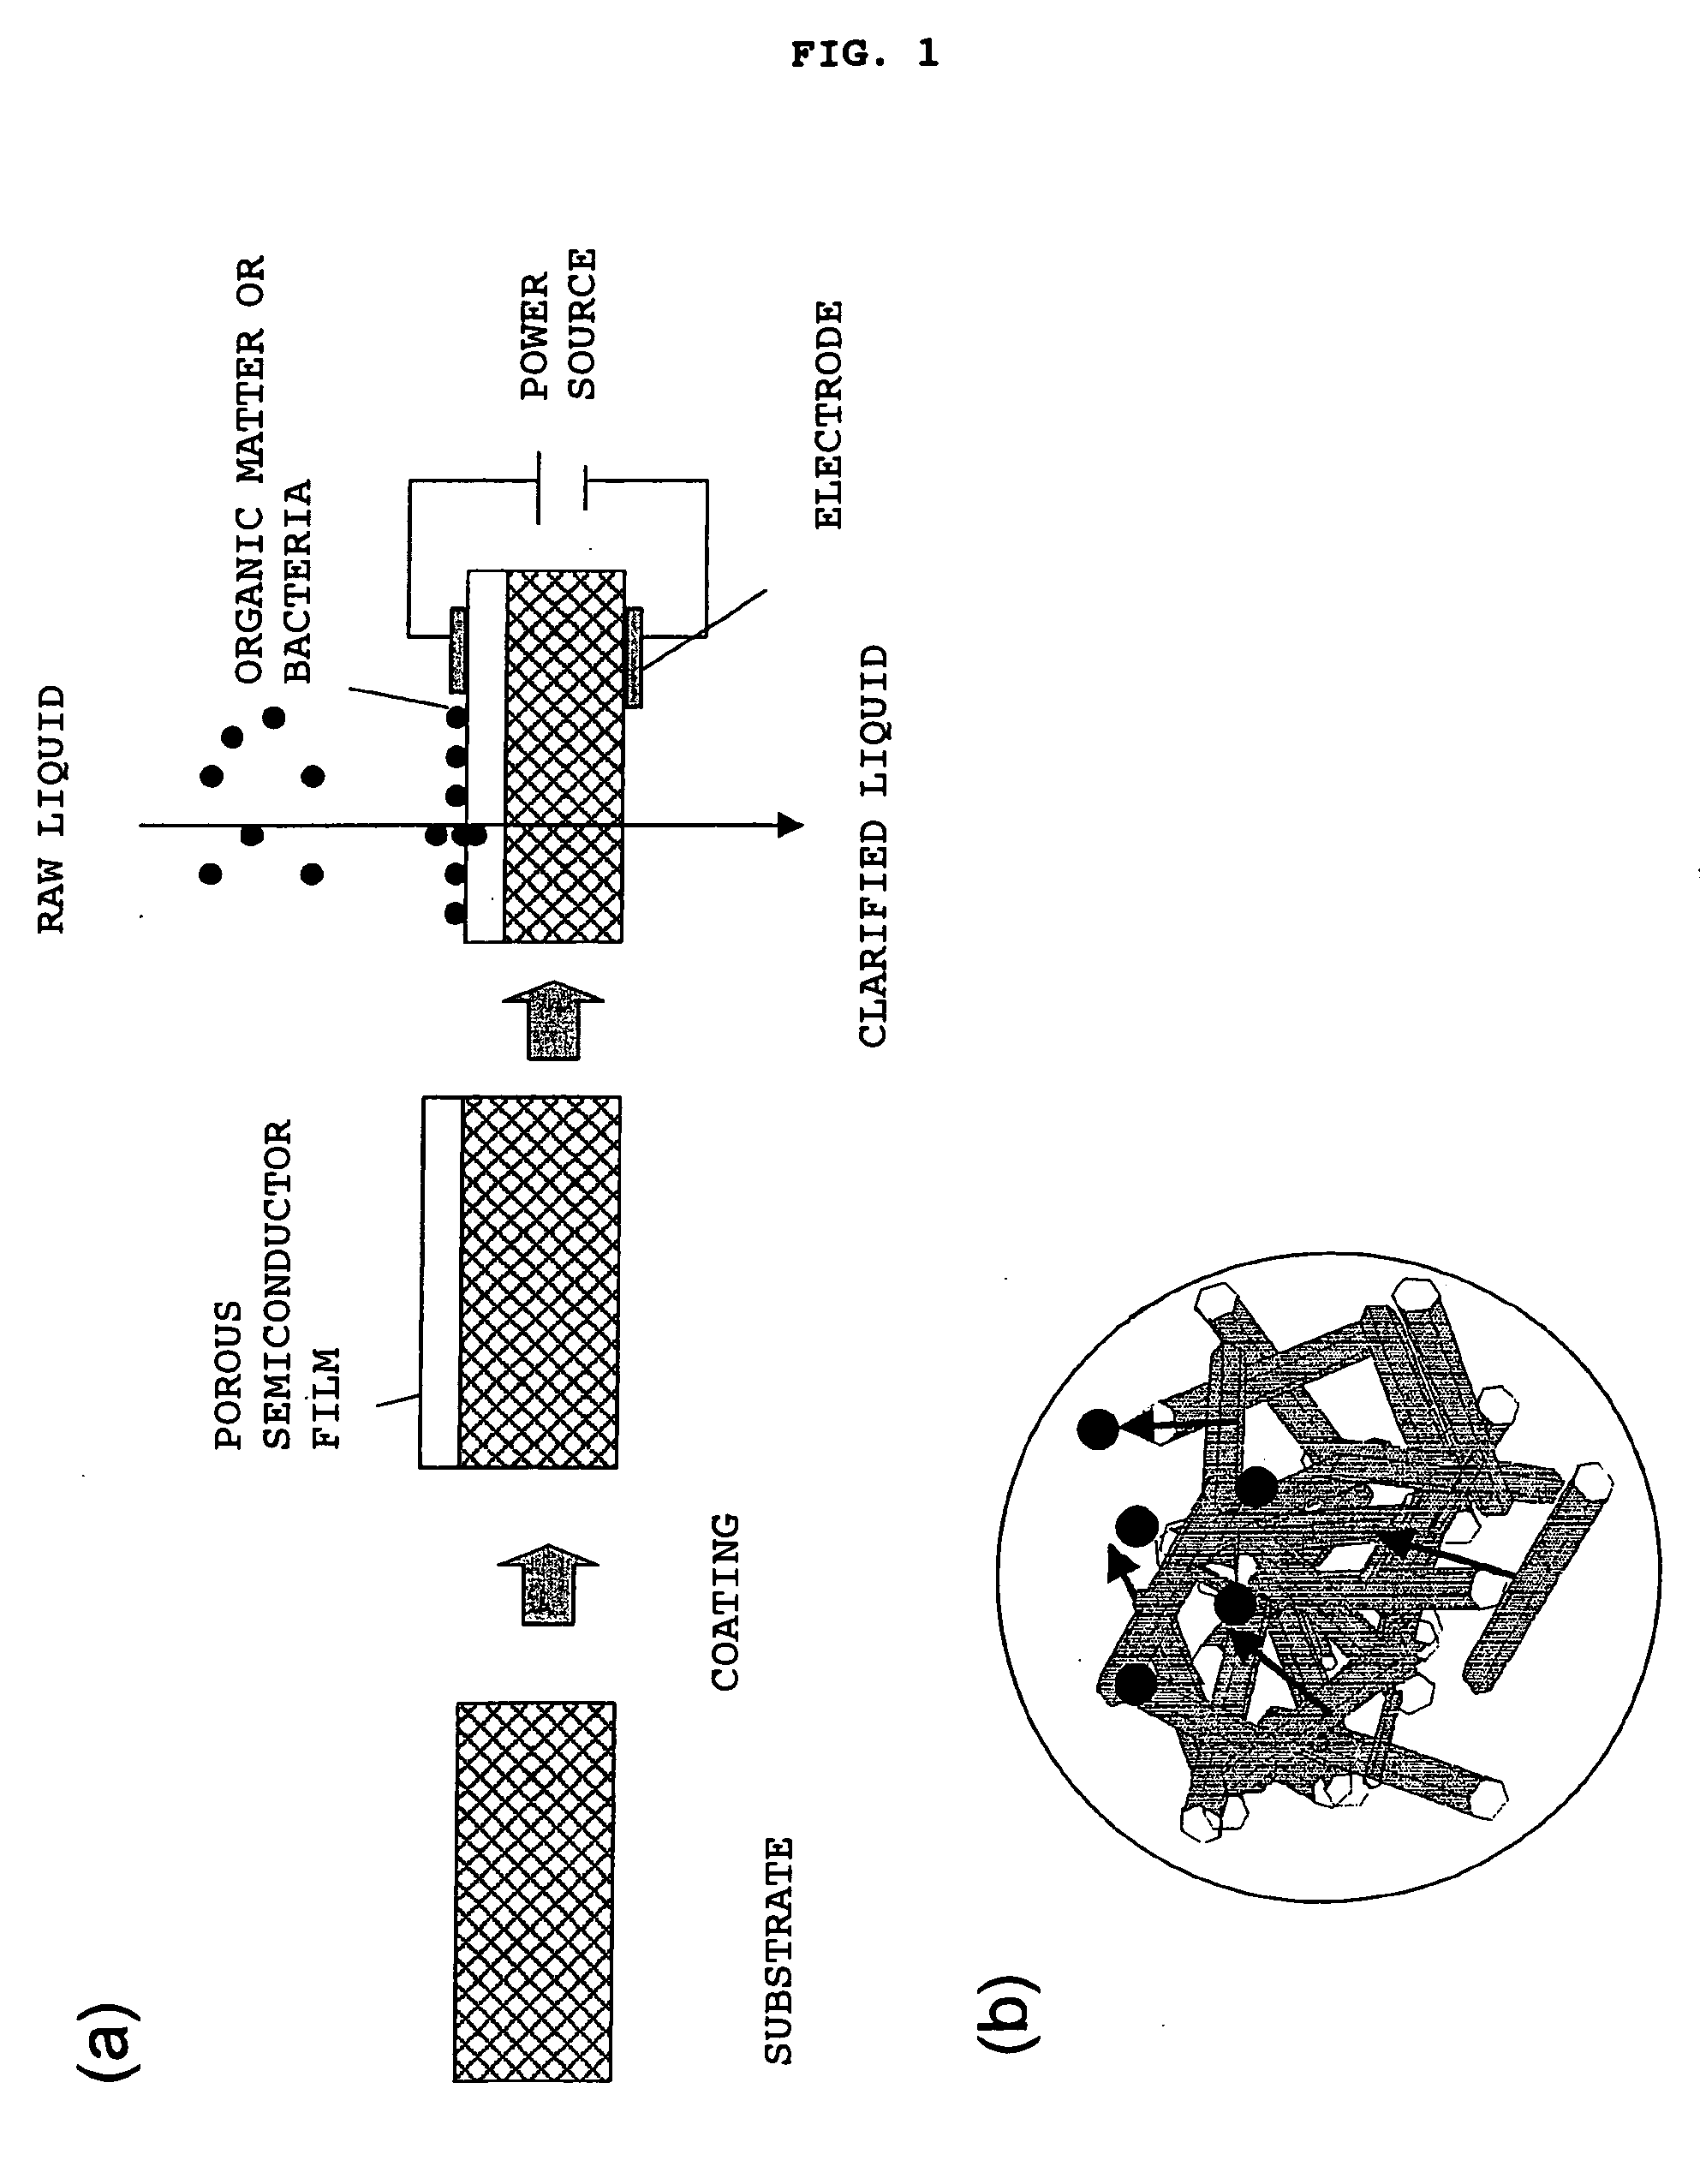 Porous semiconductor and process for producing the same